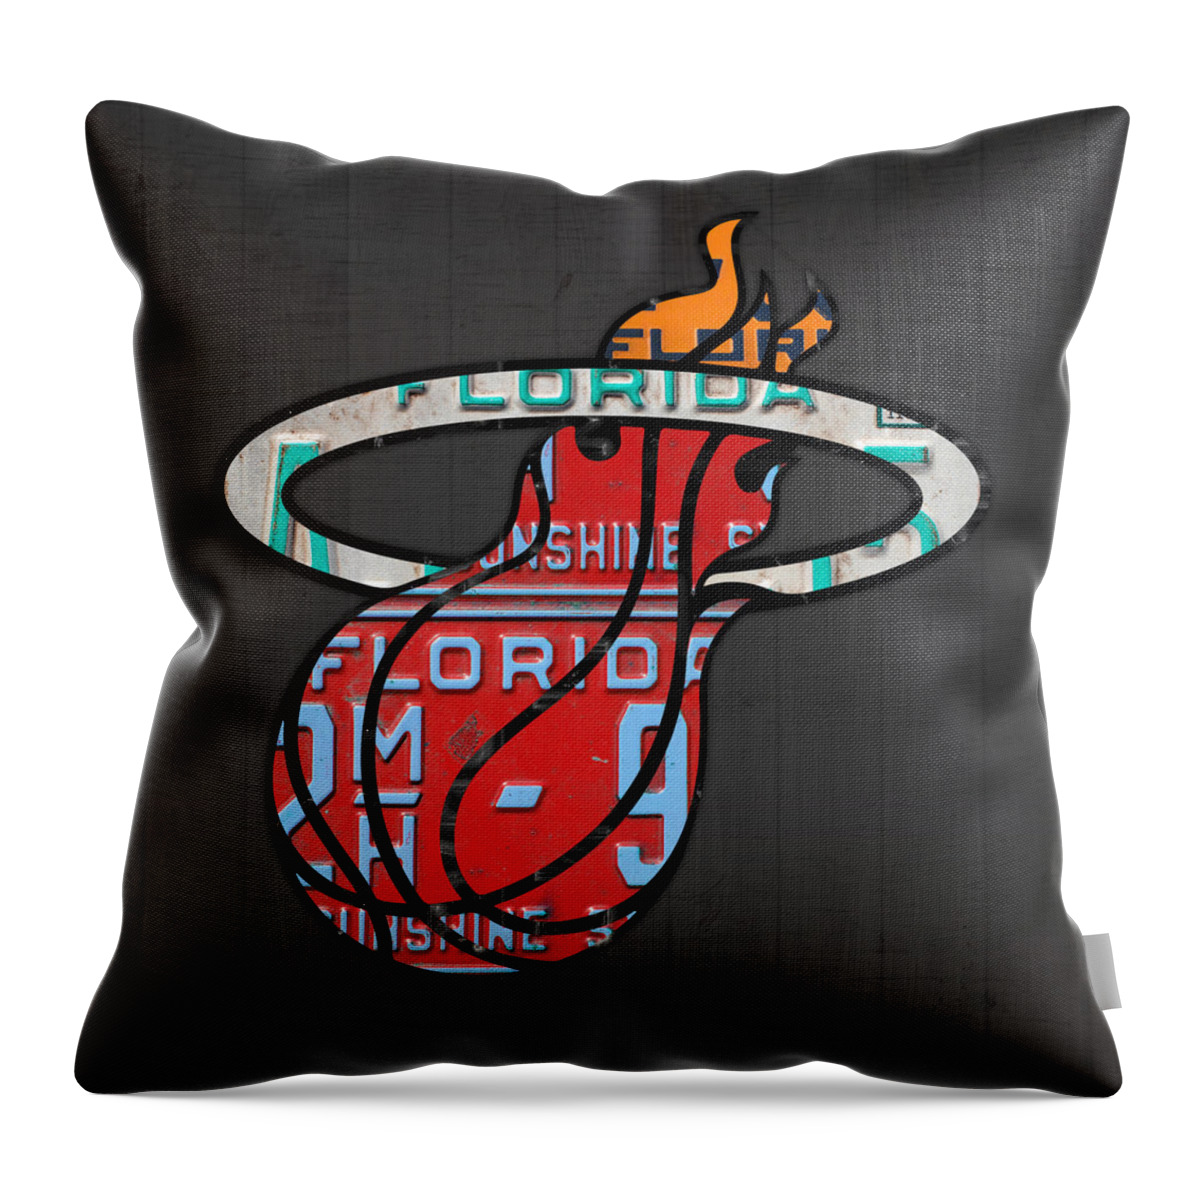 Miami Throw Pillow featuring the mixed media Miami Heat Basketball Team Retro Logo Vintage Recycled Florida License Plate Art by Design Turnpike